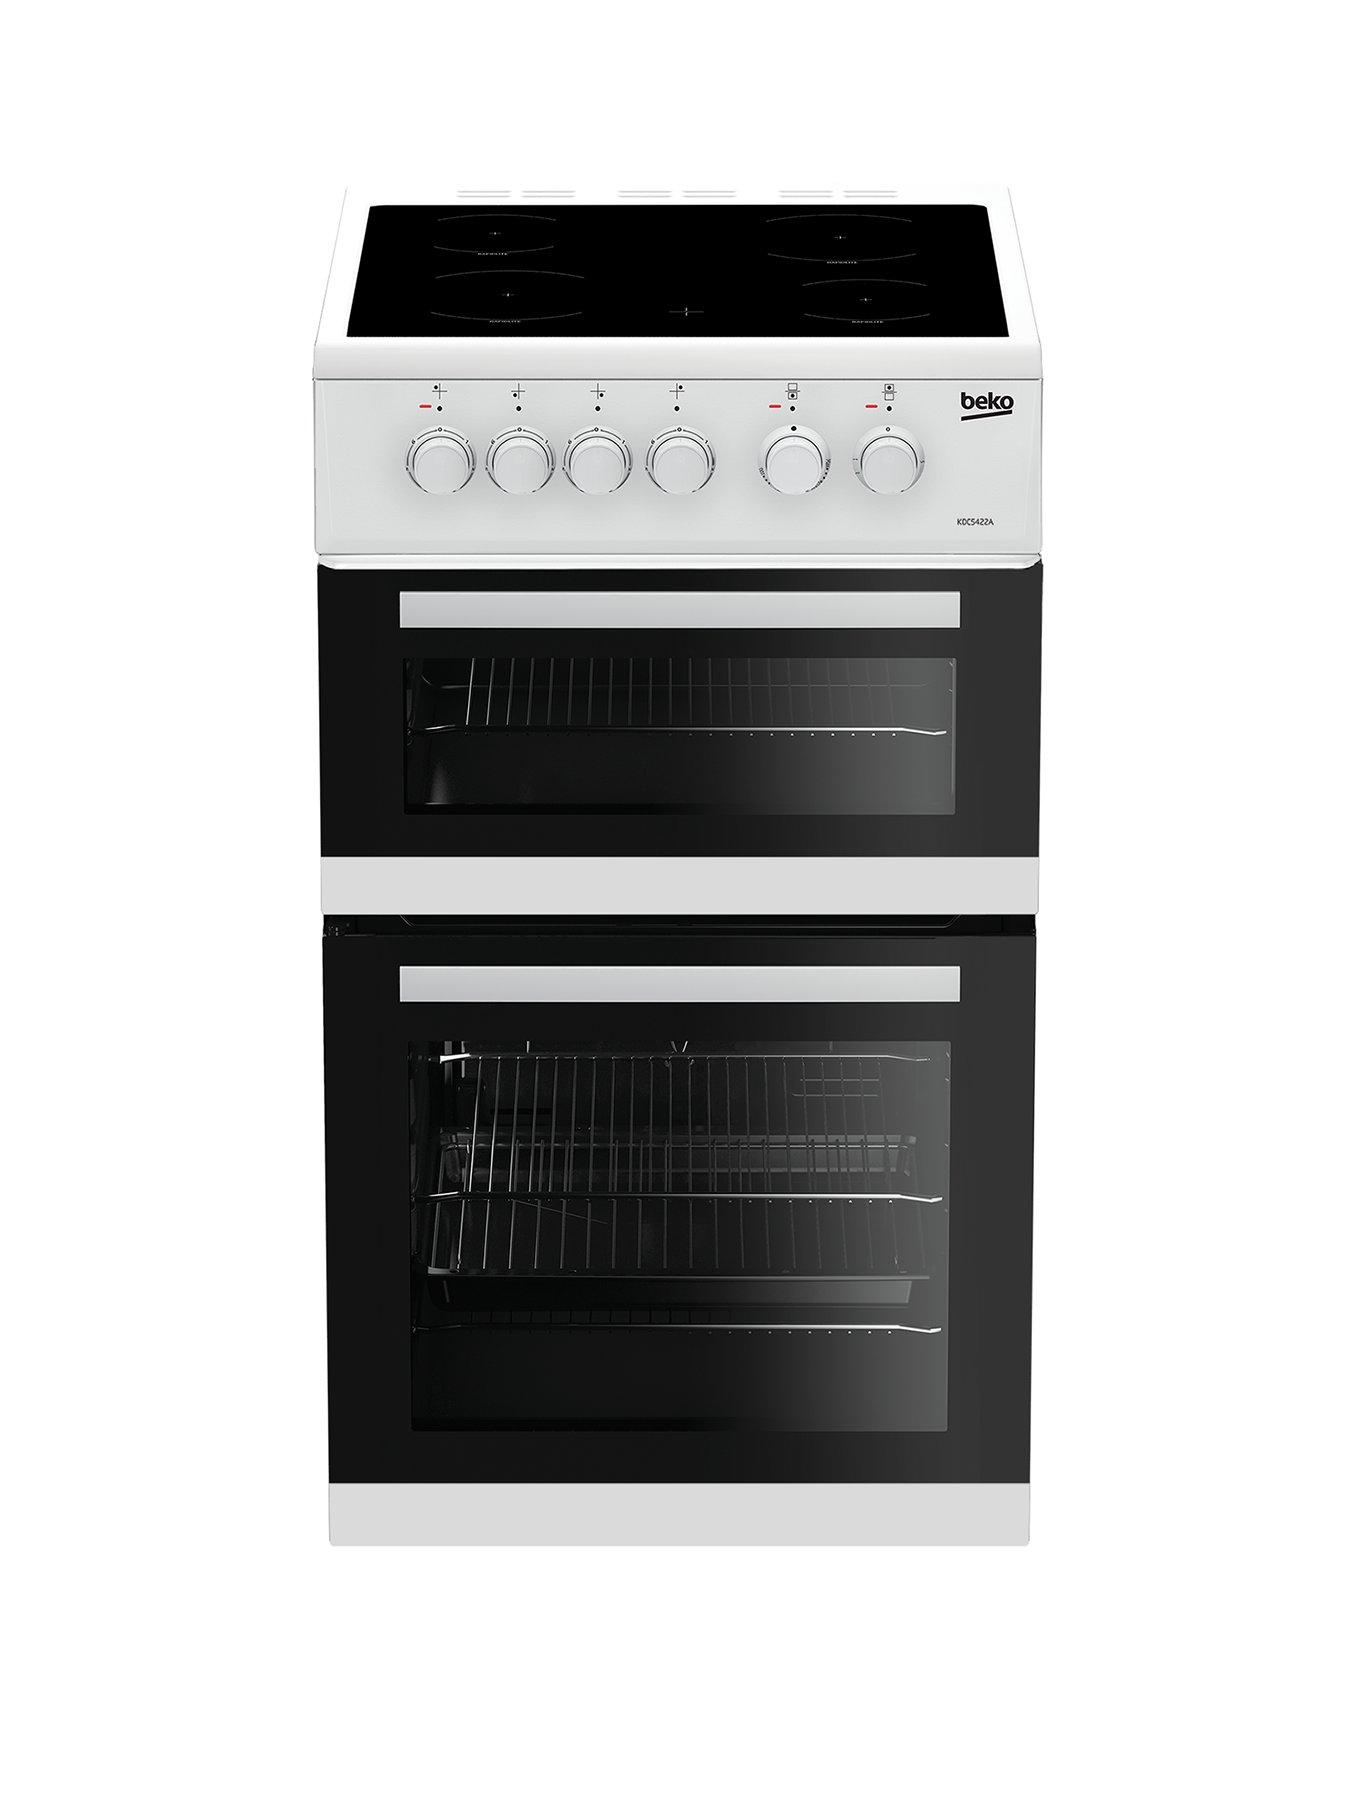 Beko Kdc5422Aw 50Cm Twin Cavity Electric Cooker - White With Connection Review thumbnail